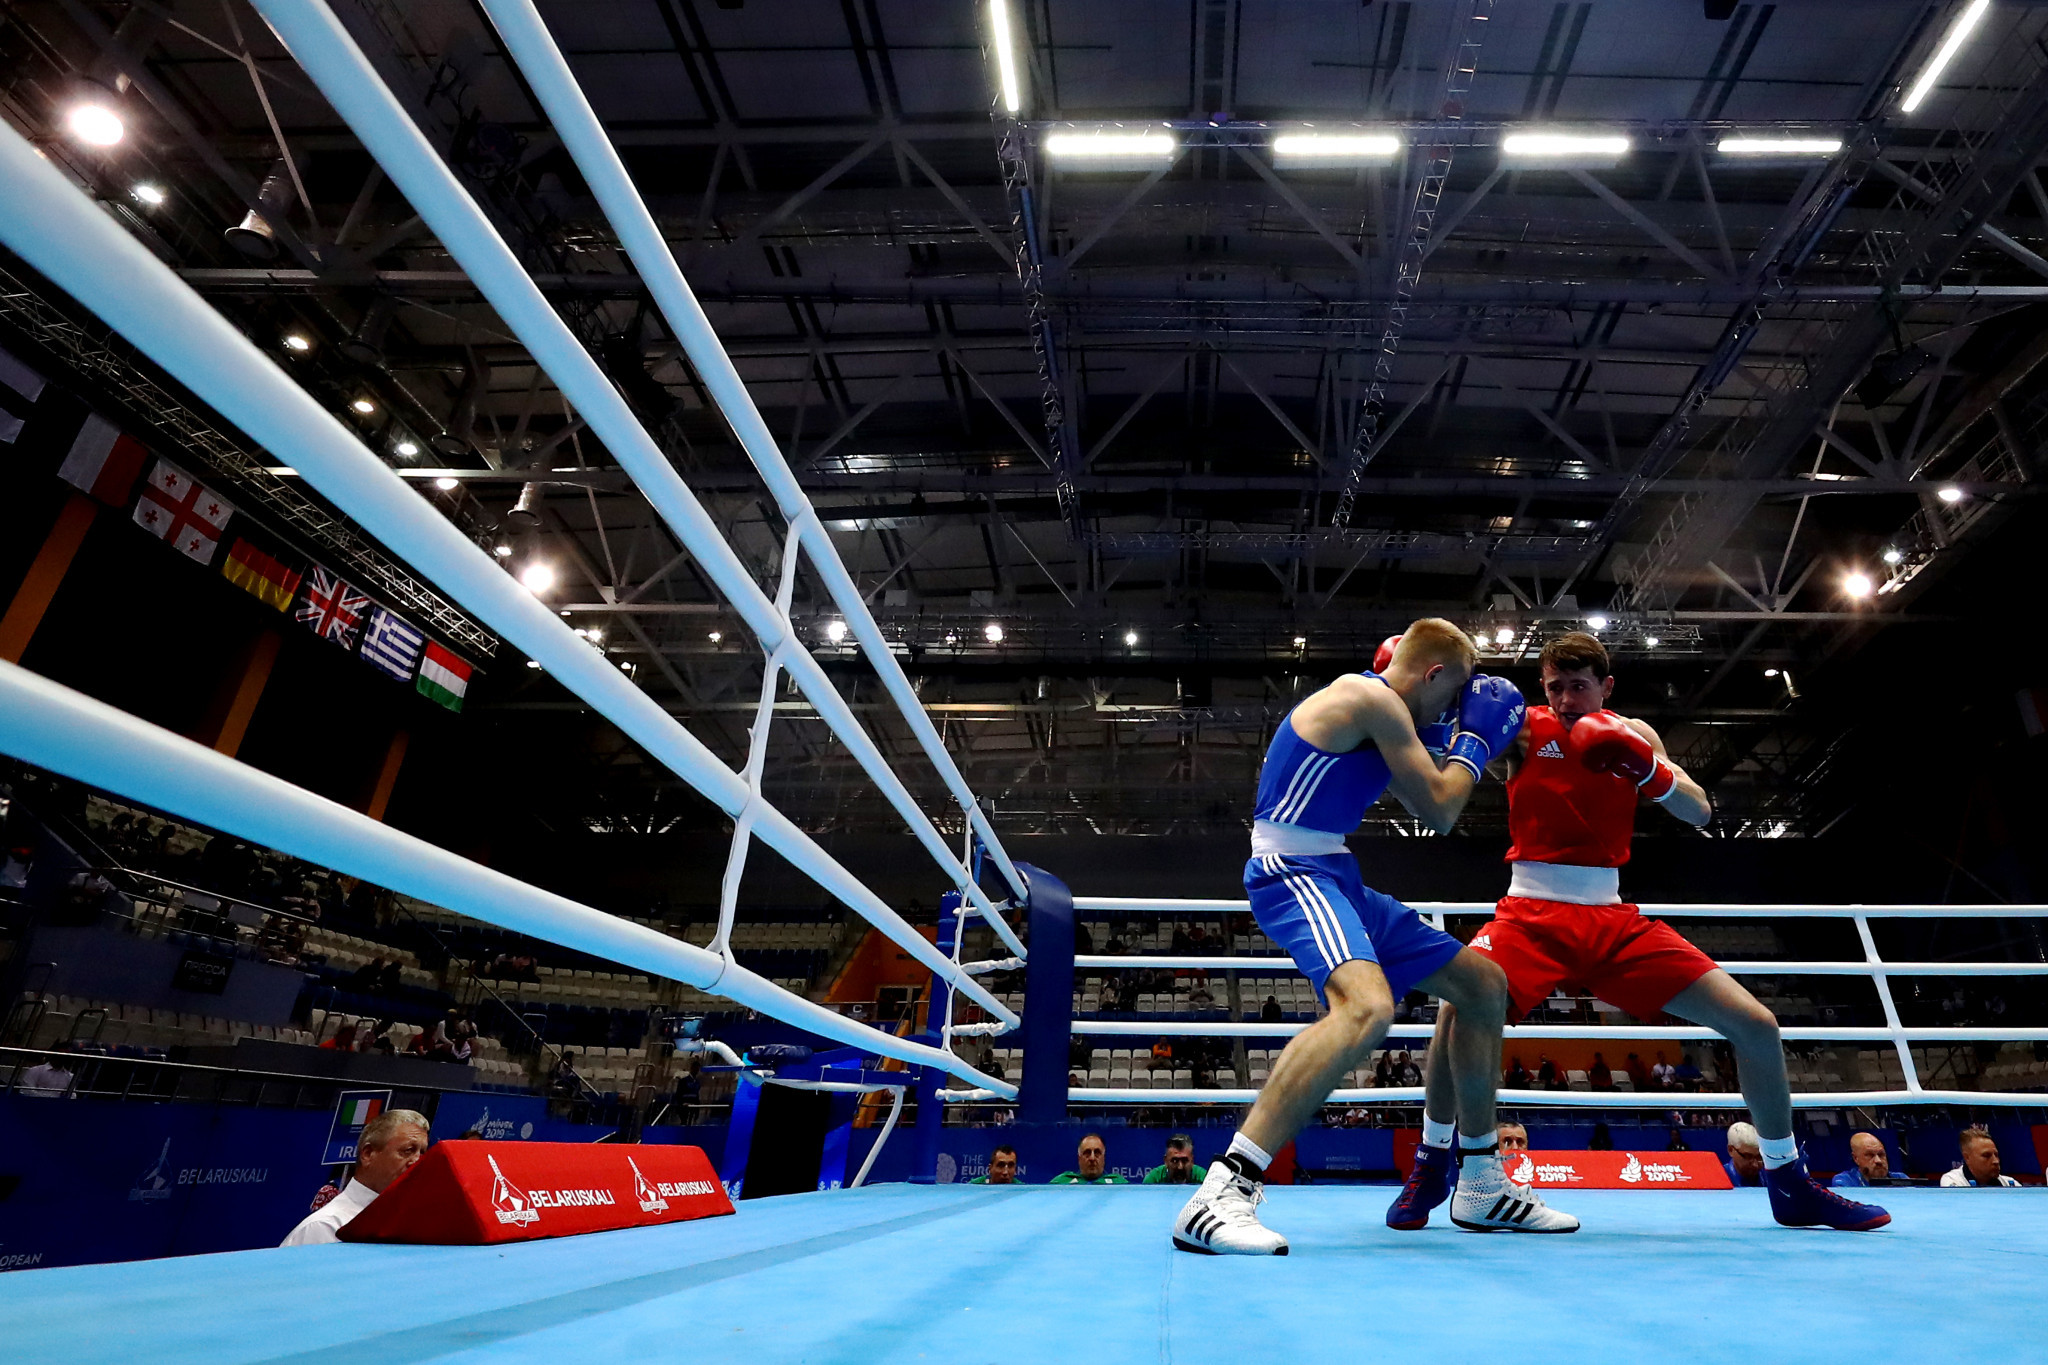 The International Boxing Association has called on the International Olympic Committee to cancel the Paris 2024 qualification status of the European Games 2023 boxing competition ©Getty Images